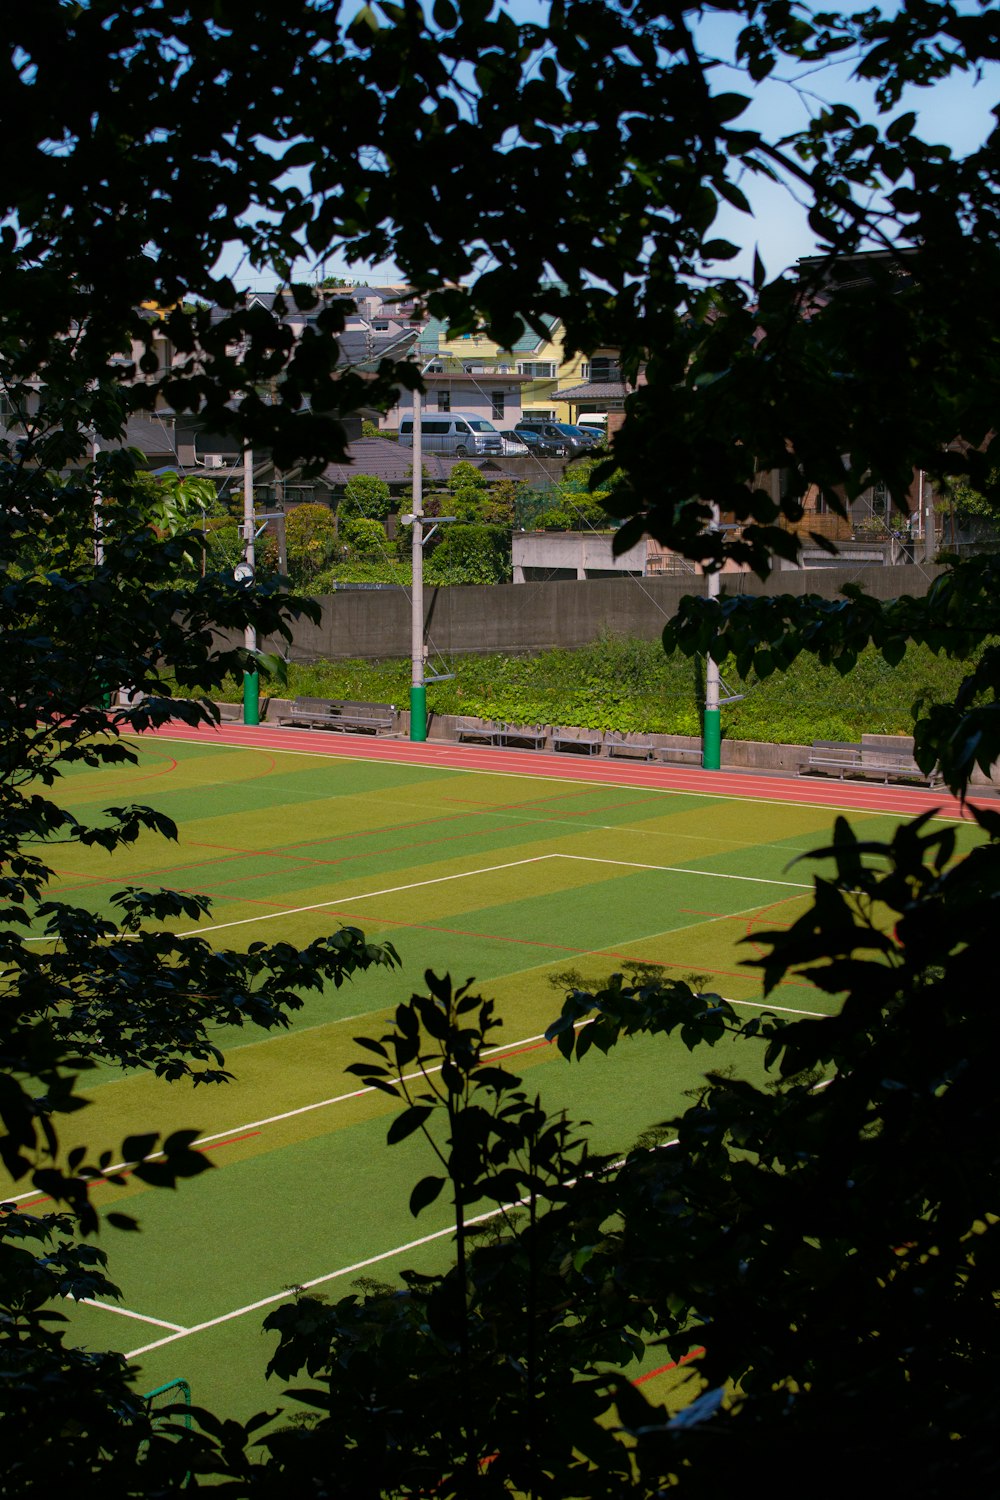 a view of a tennis court through some trees